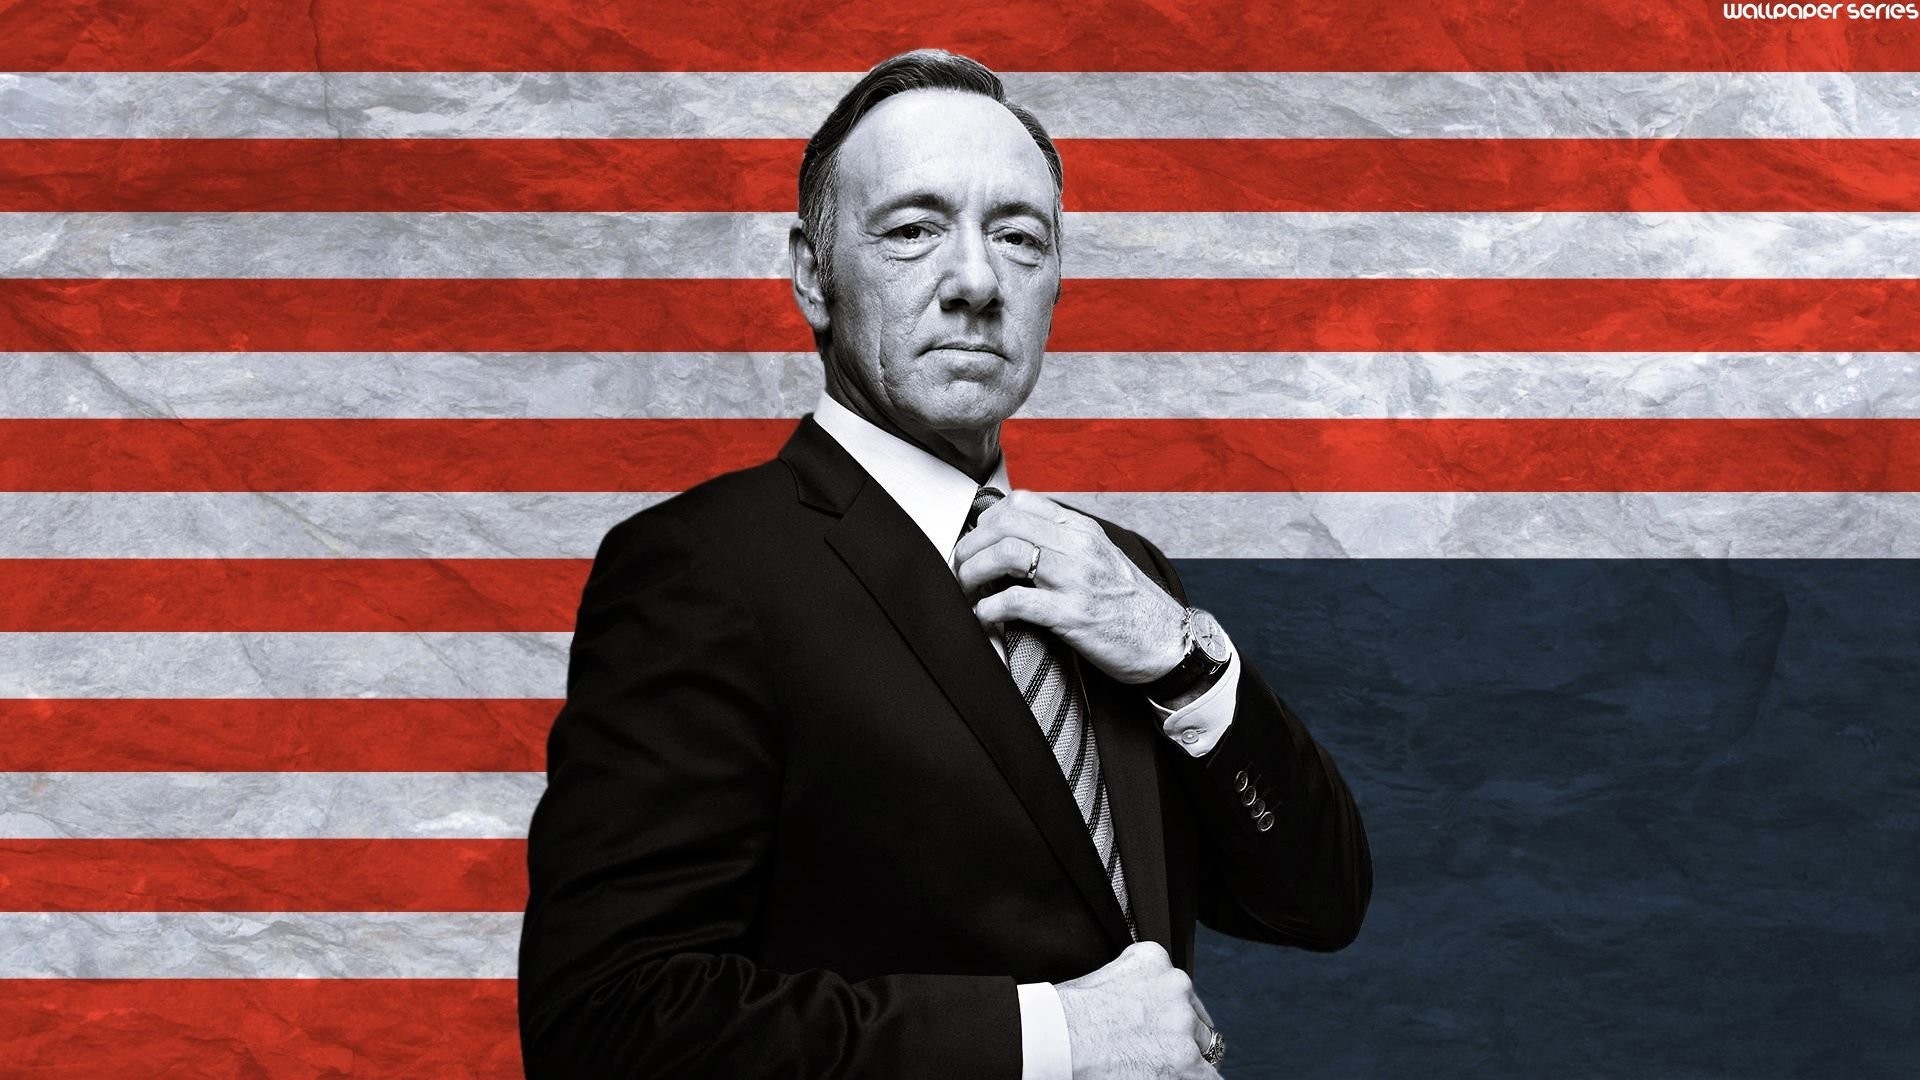 1920x1080 Sleepless Nights Alert: New Episodes Of House Of Cards Are Streaming! |  Montrealgotstyle